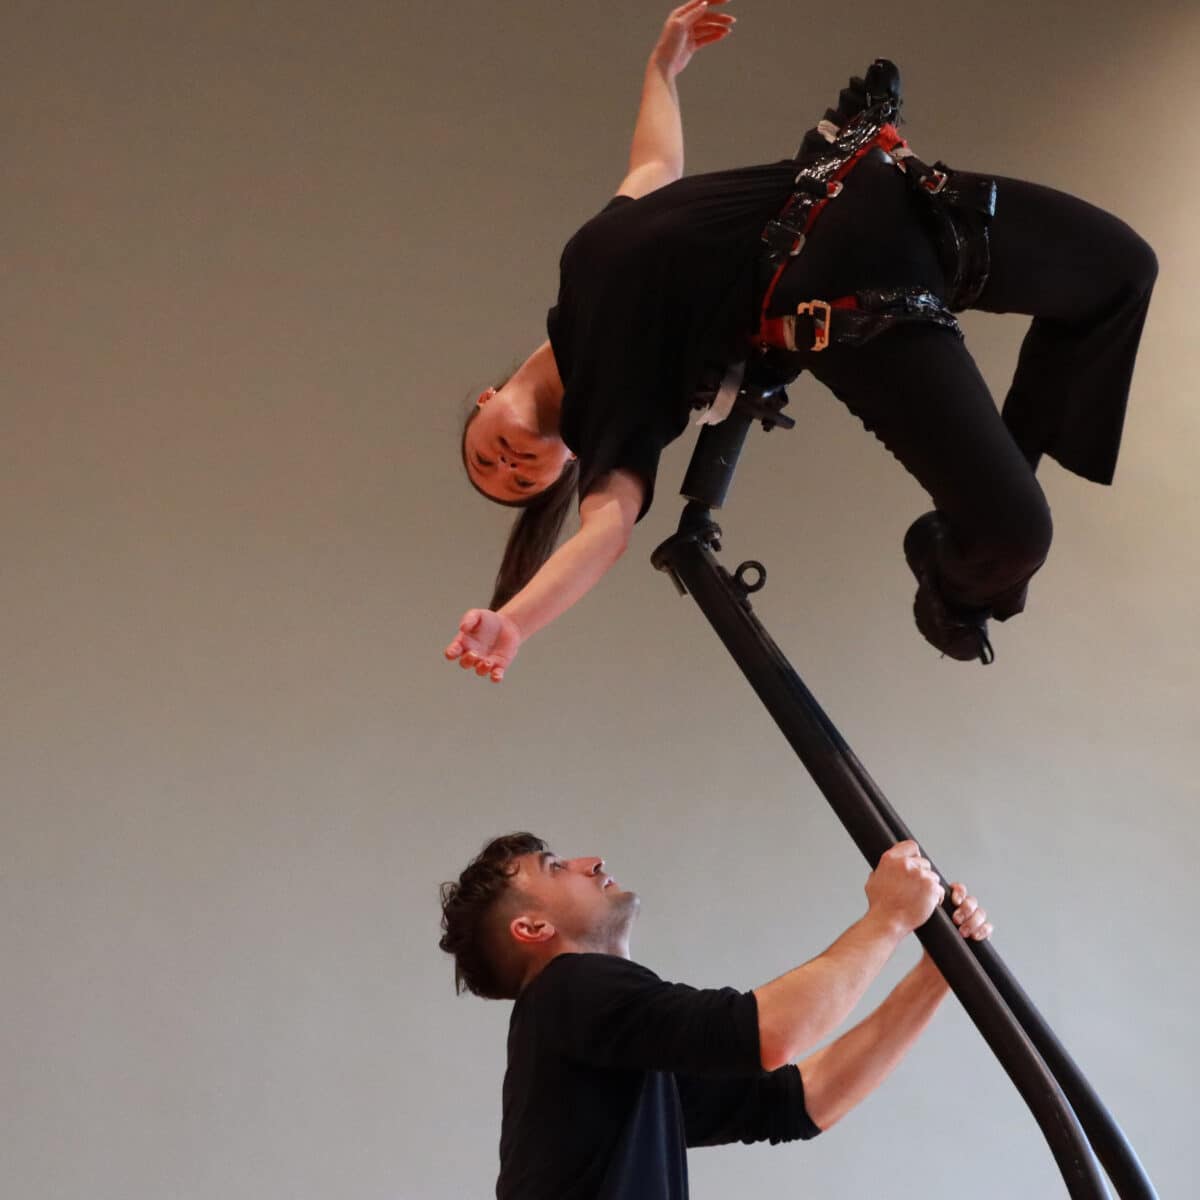 Performer holds a tall counterweighted lift with a performer attached to the top in a weightlessness pose.